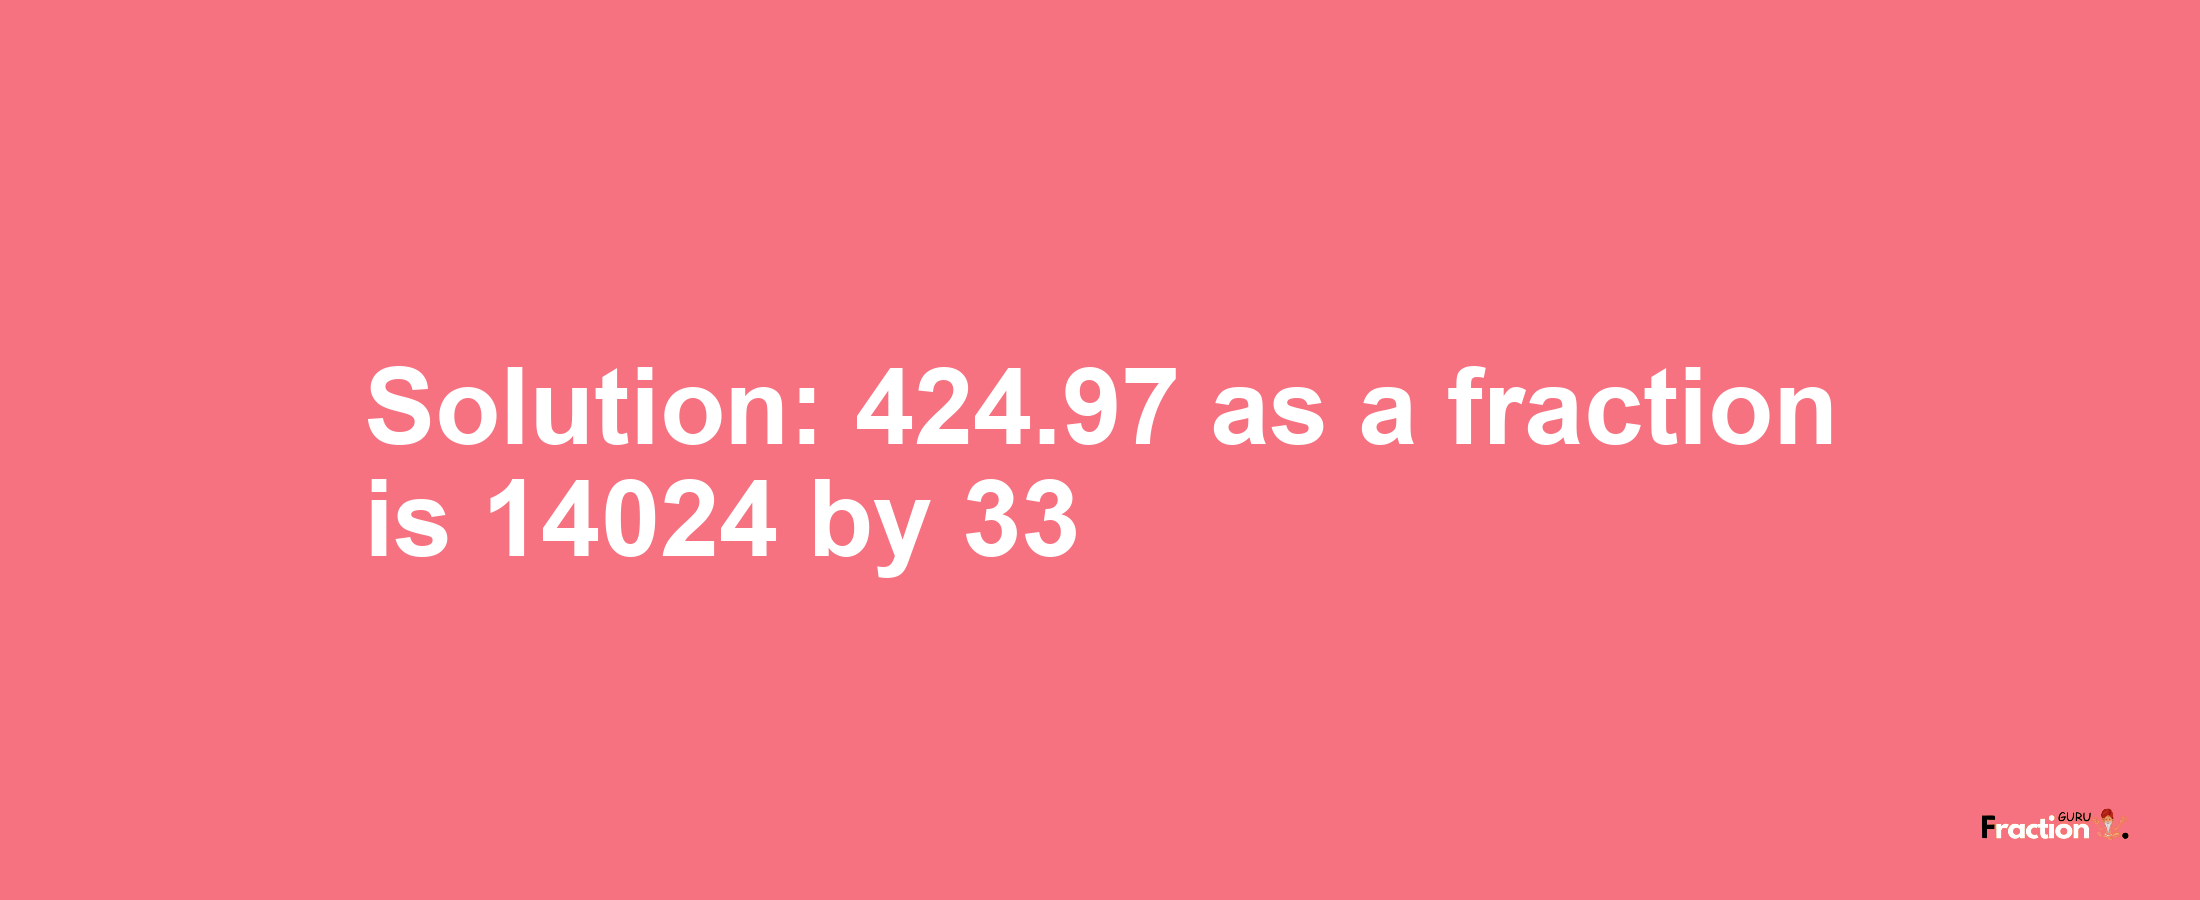 Solution:424.97 as a fraction is 14024/33